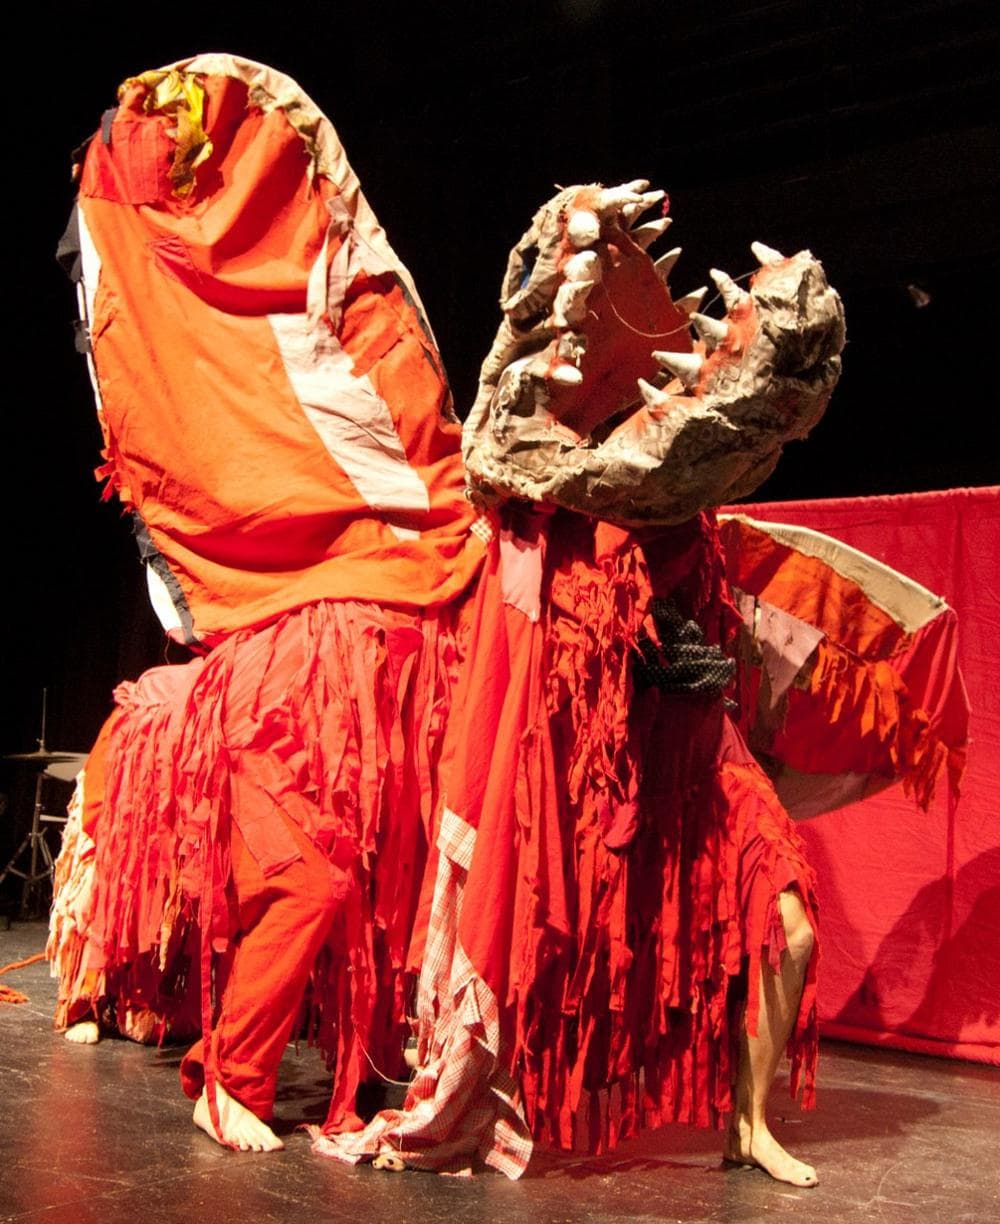 The &quot;terrible dragon&quot; from Bread and Puppet Theater's revival of its 1962 anti-war show &quot;King Story&quot; at Boston College. (Greg Cook)